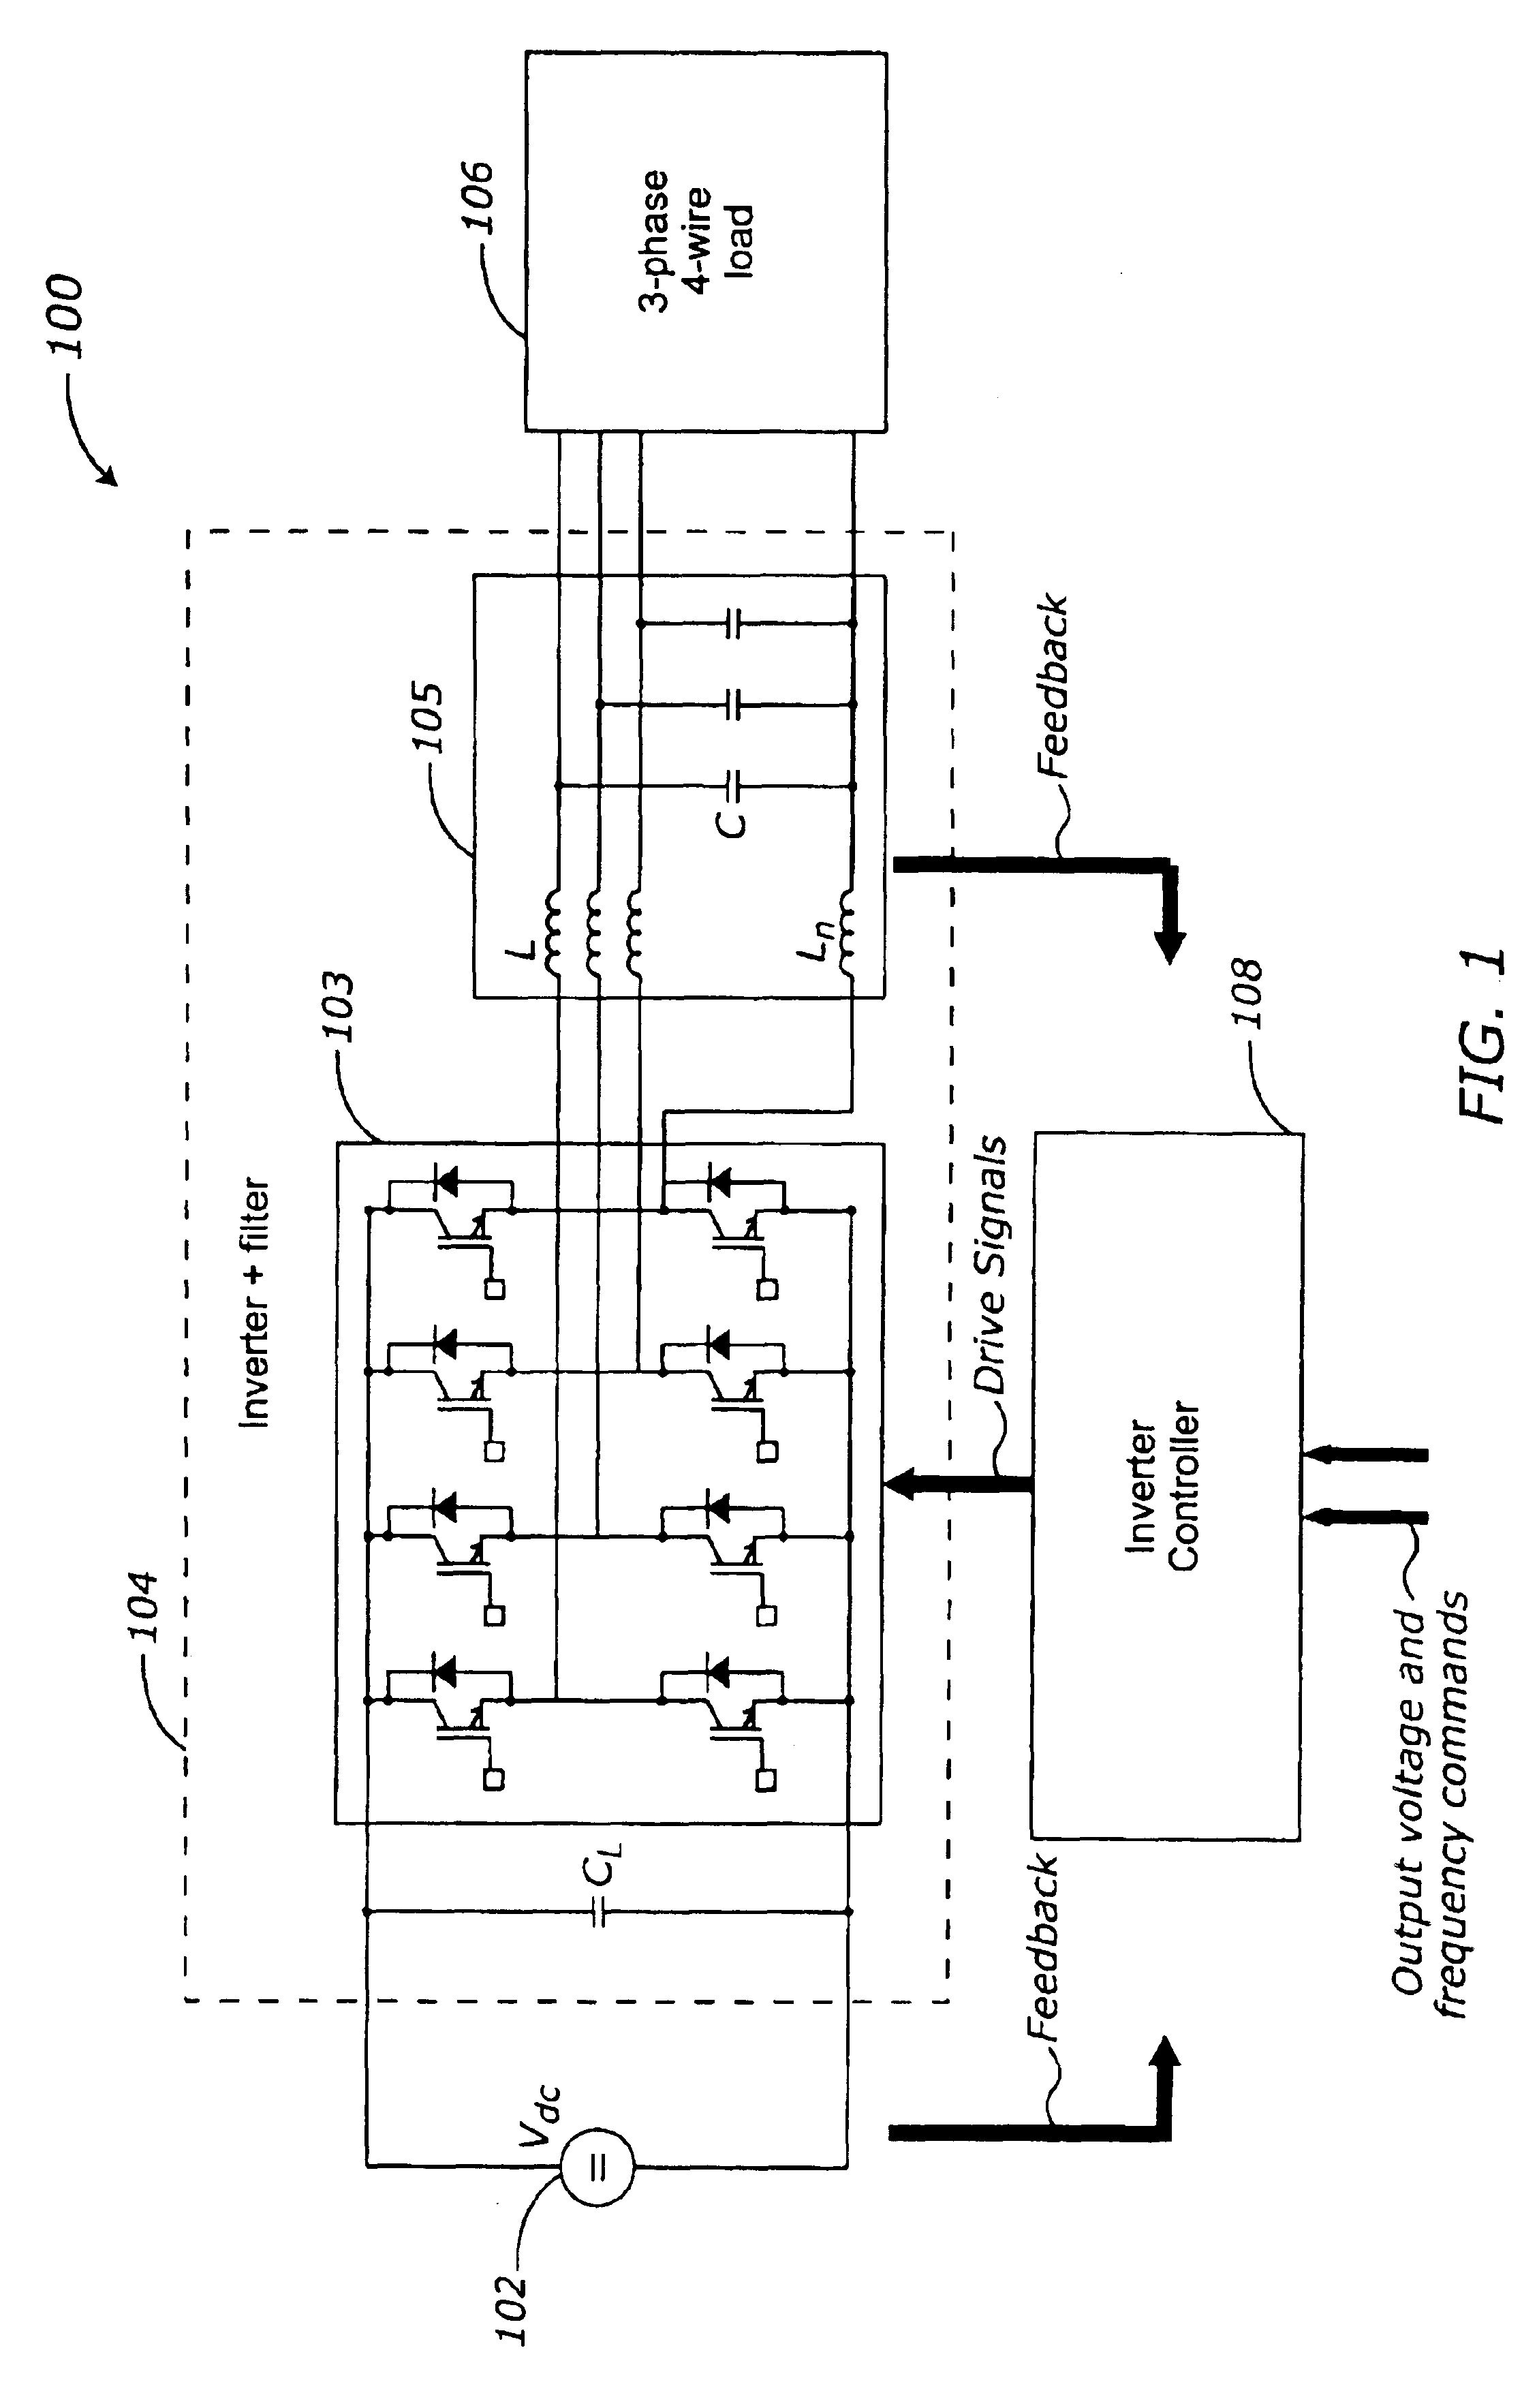 Method and apparatus for controlling a stand-alone 4-leg voltage source inverter